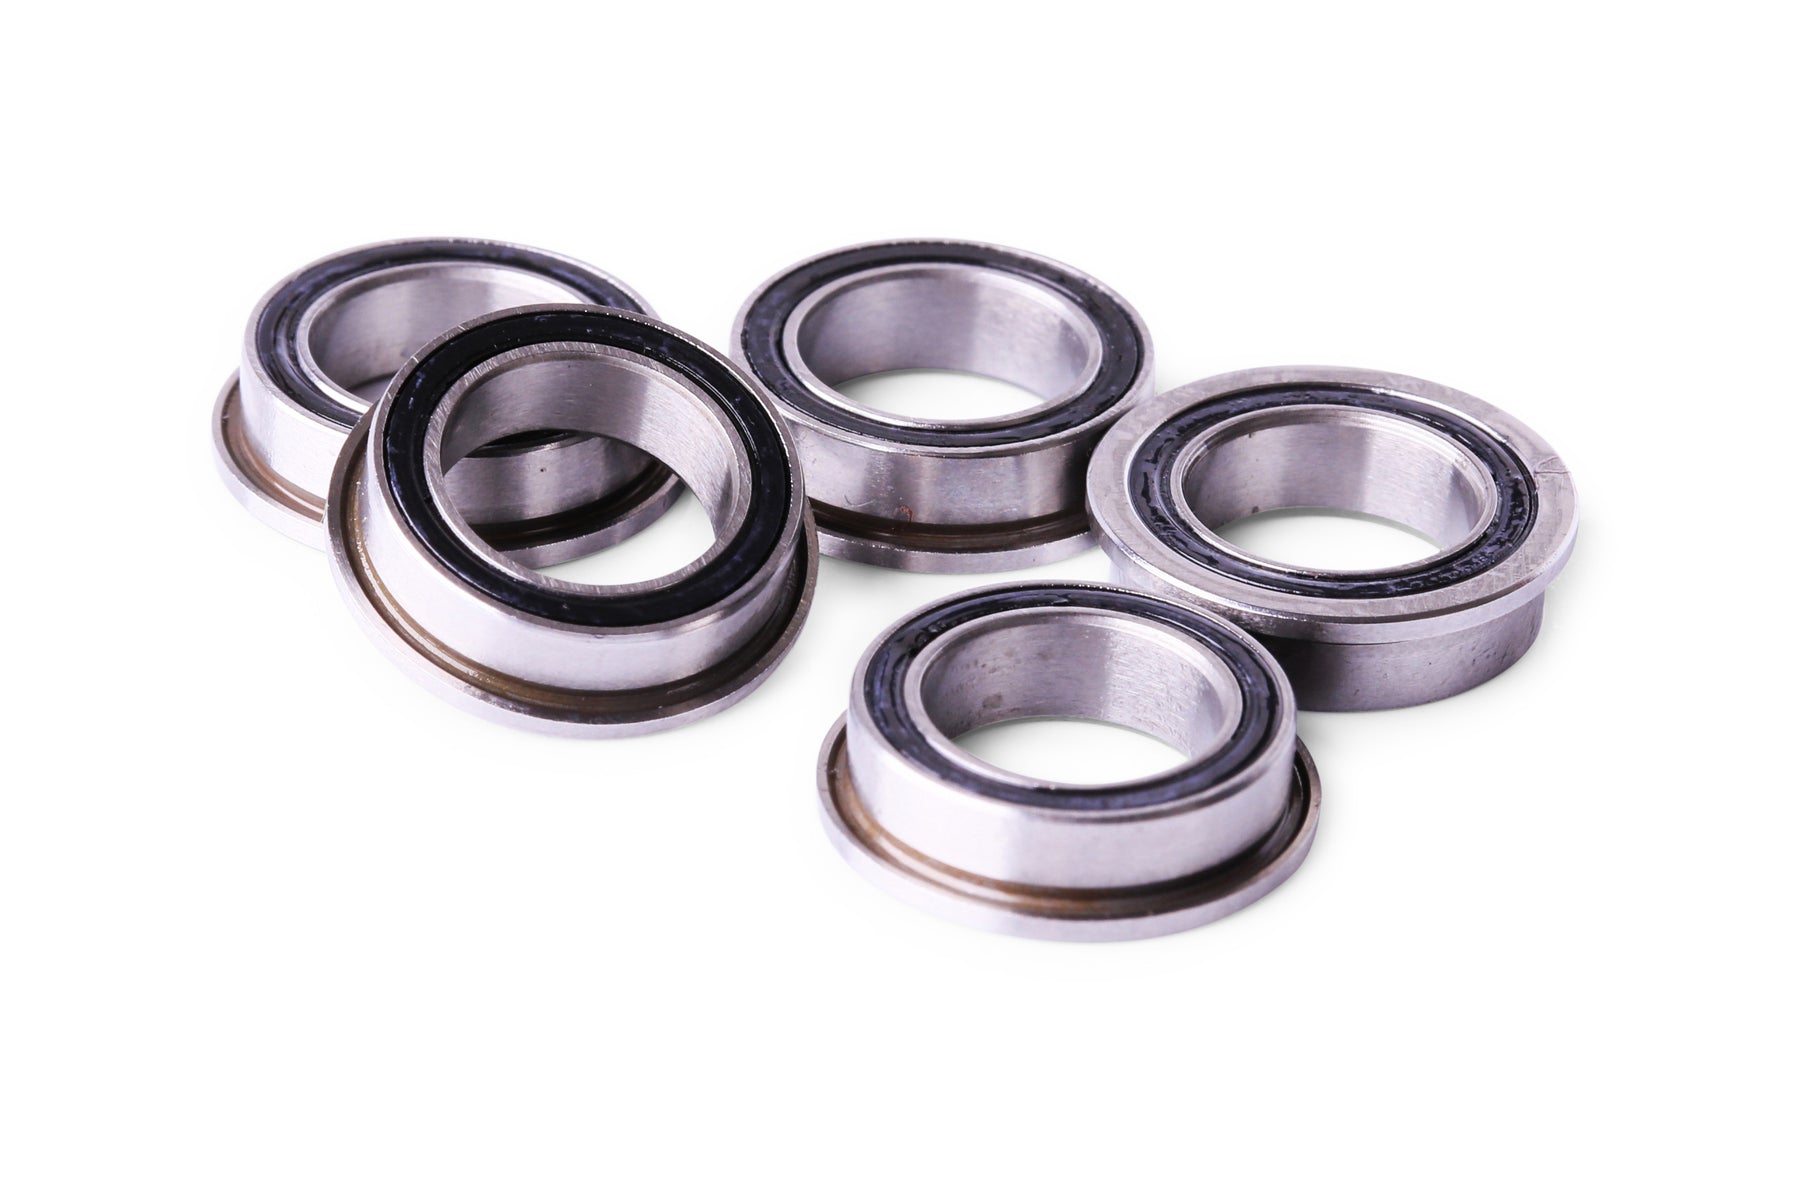 Fishing Reel Bearings - High Quality Stainless Steel And Ceramic Hybrid